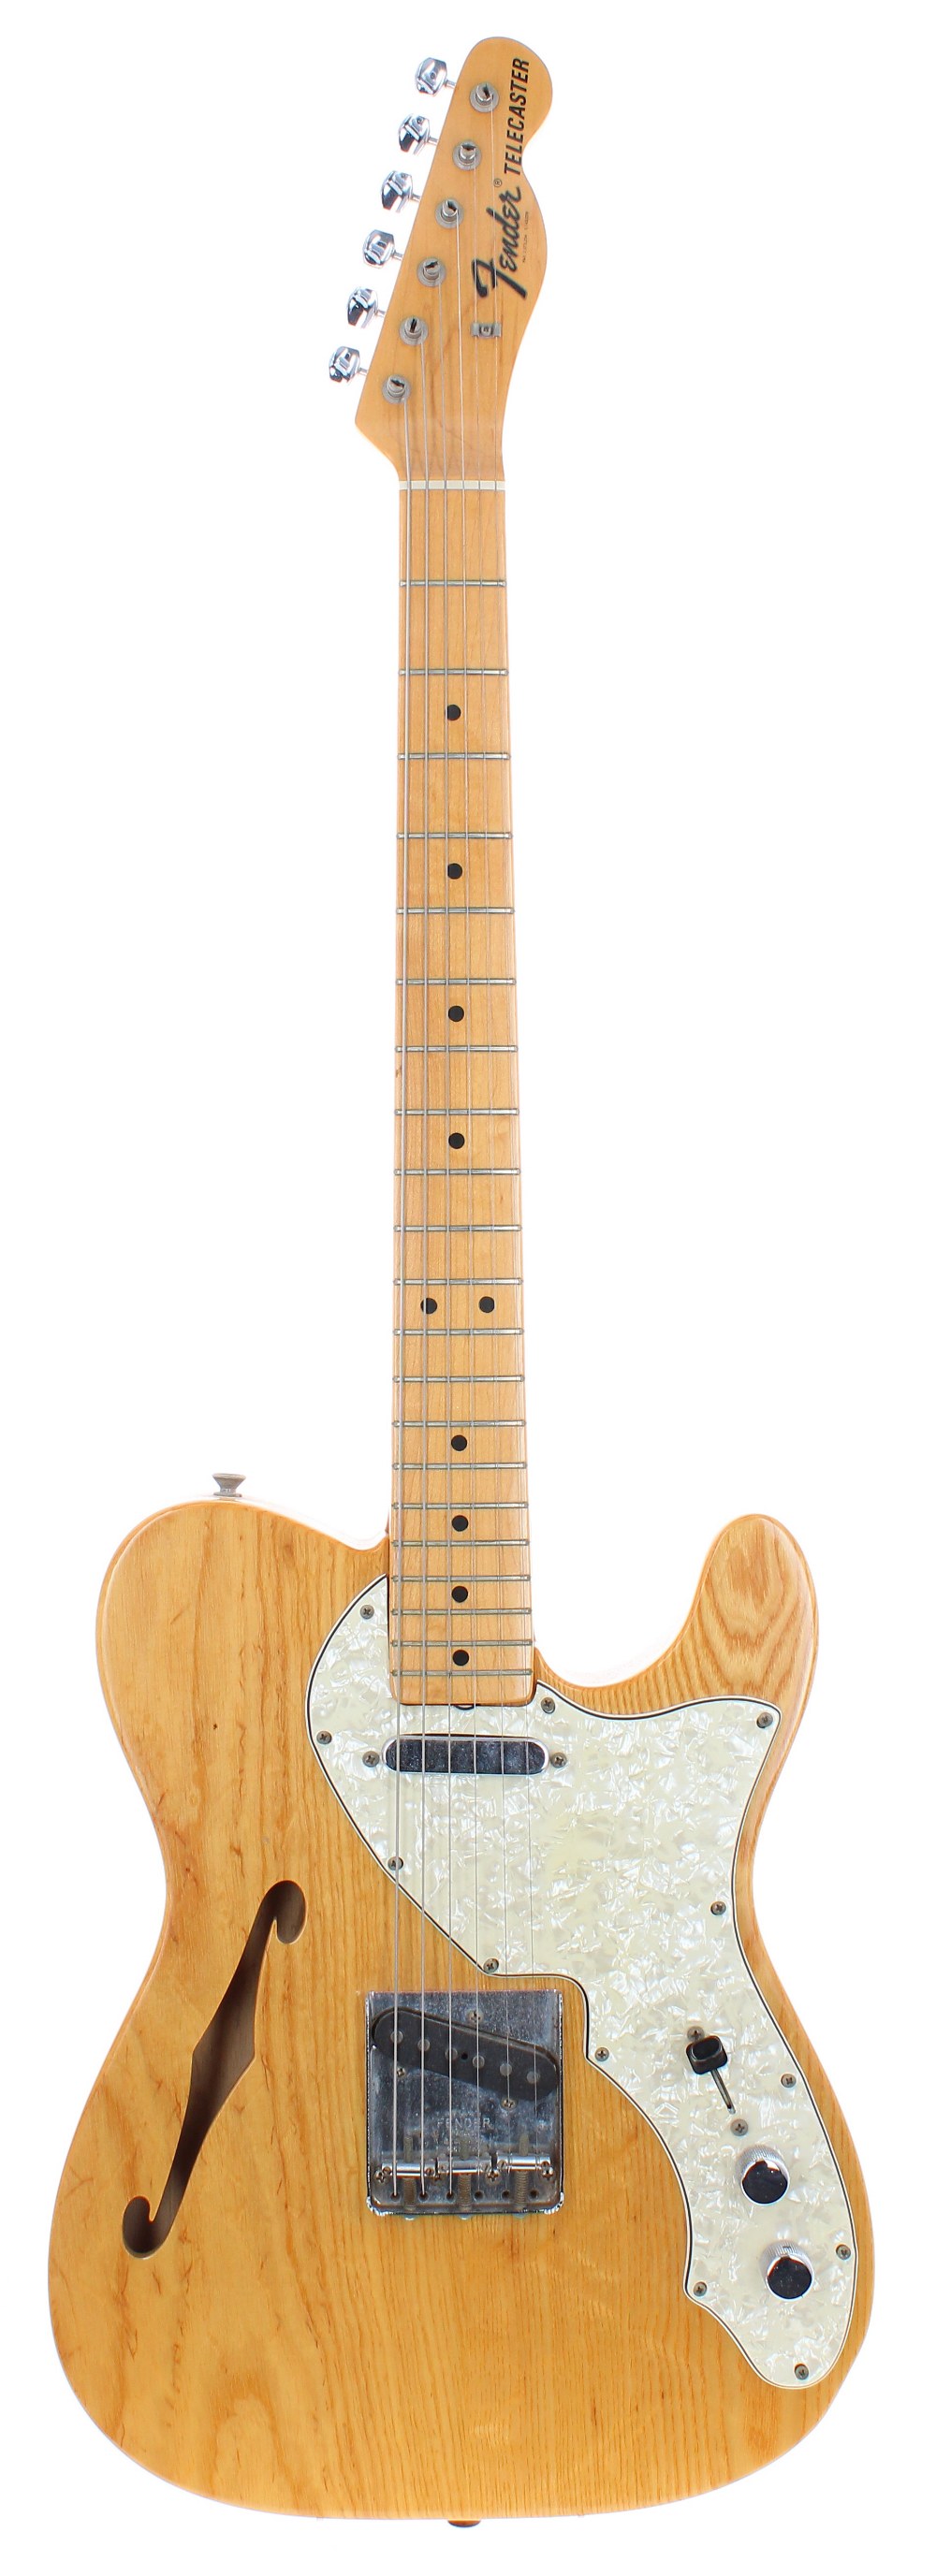 1968 Fender Telecaster Thinline Type 1 electric guitar, made in USA, ser. no. 2xxxx4; Finish: